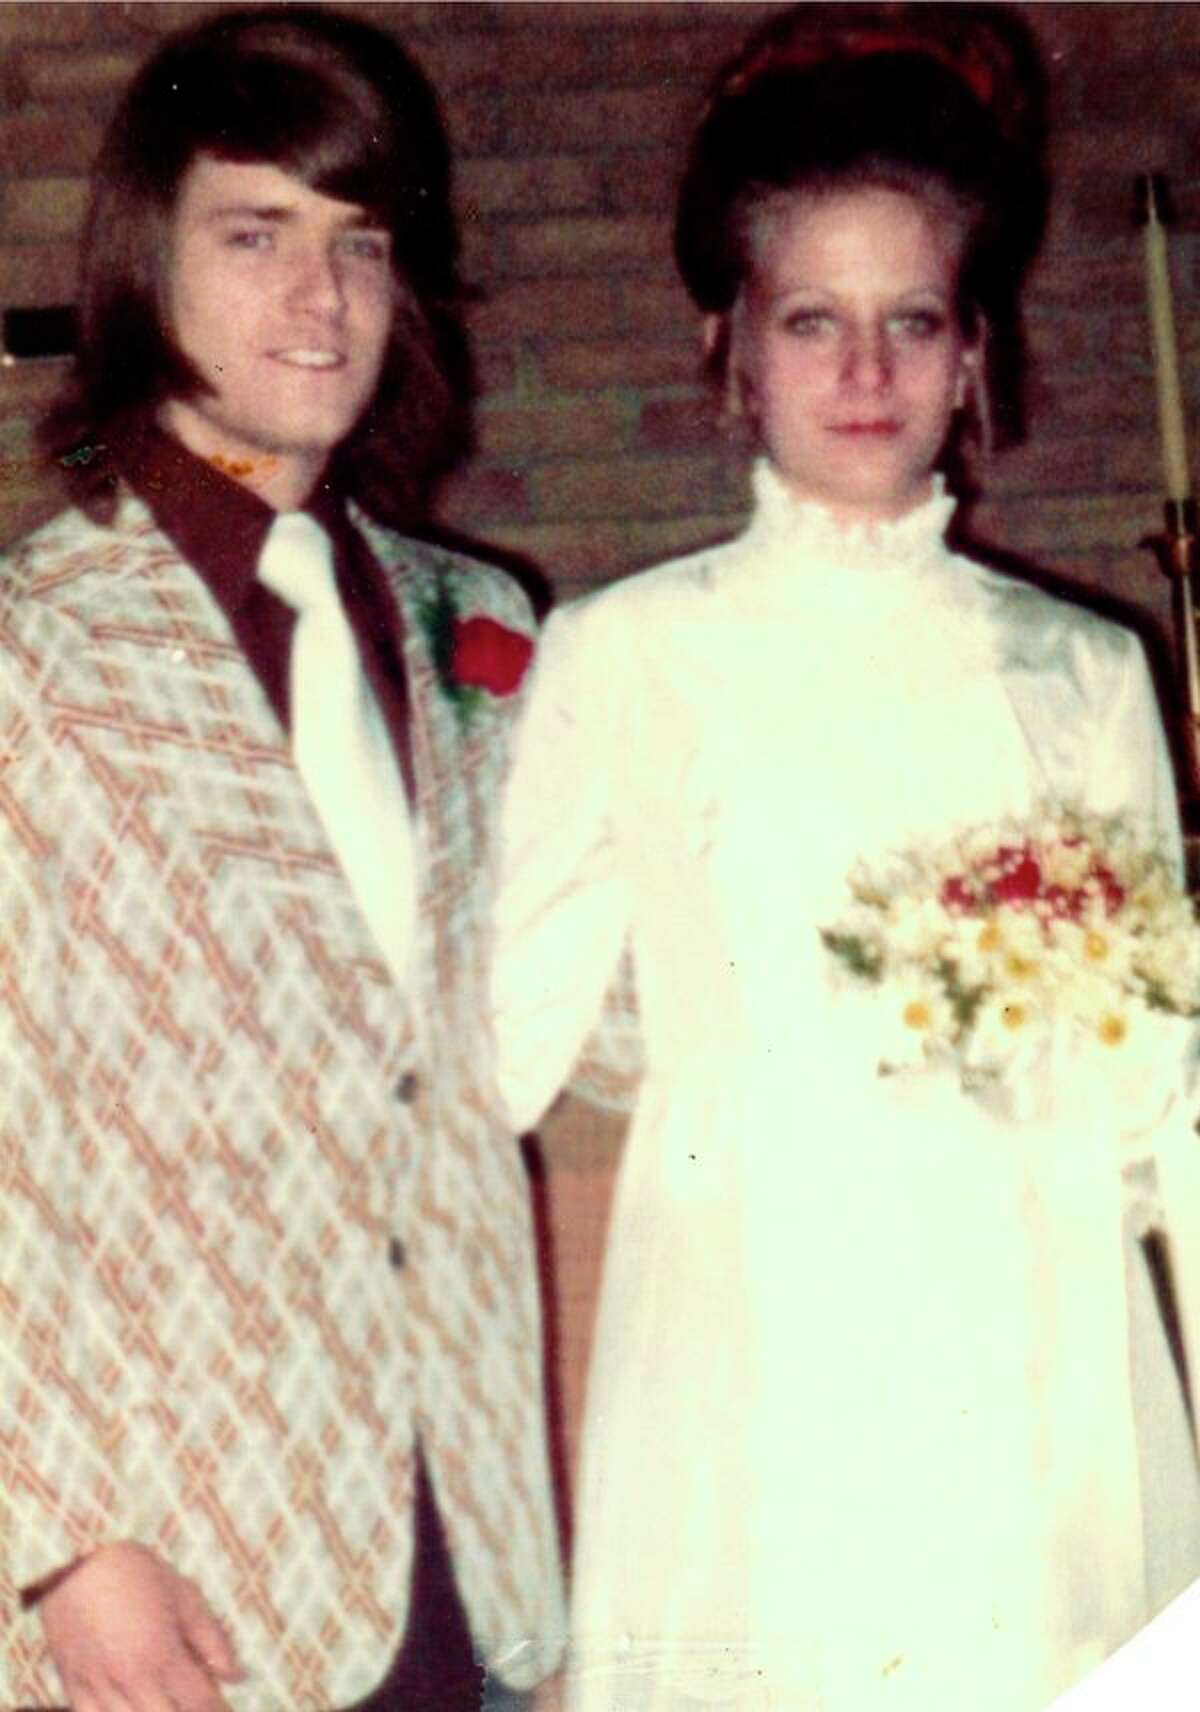 This is the wedding picture of Steve Miller and Vicki Gough. Steve was working at his Uncle Dick Cassiday's Texaco gas station when a young woman named Vicki Gough stopped by to say 'hello' to his Aunt Bea Cassiday. Later that night, he asked his aunt who the good looking blonde was.